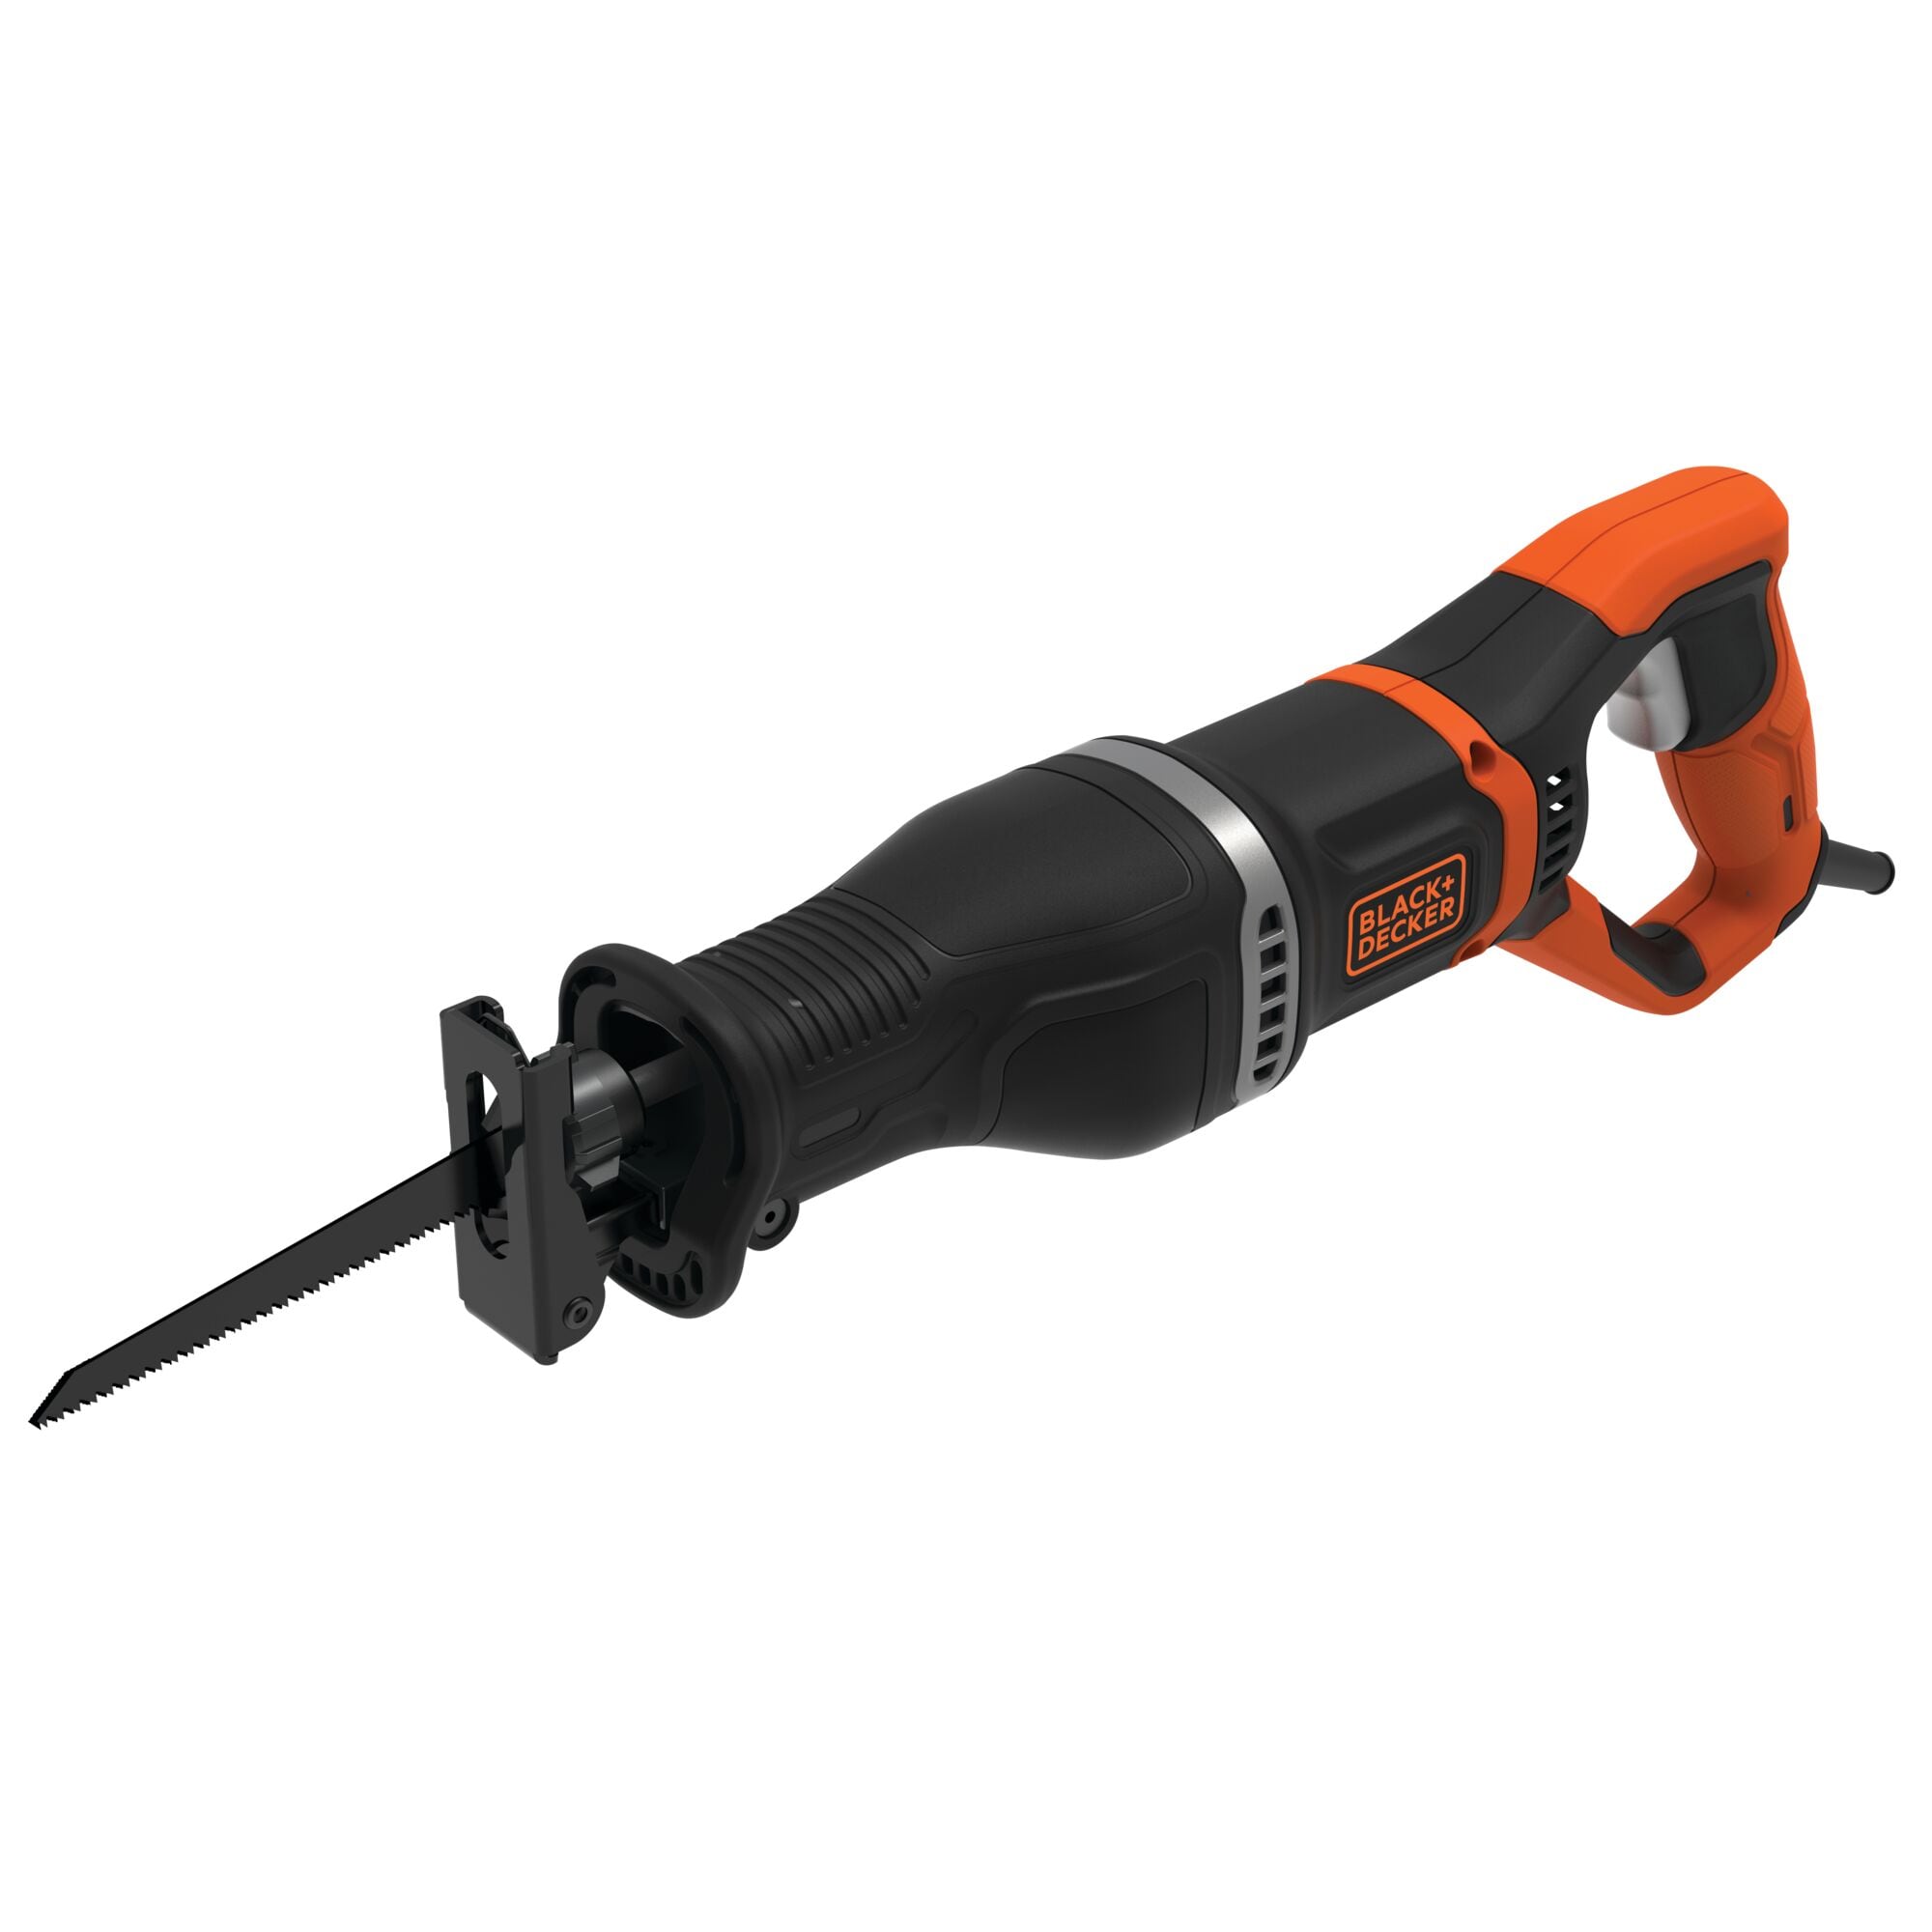 Winneconne, WI - 5 May 2020: A package of Black and Decker corded